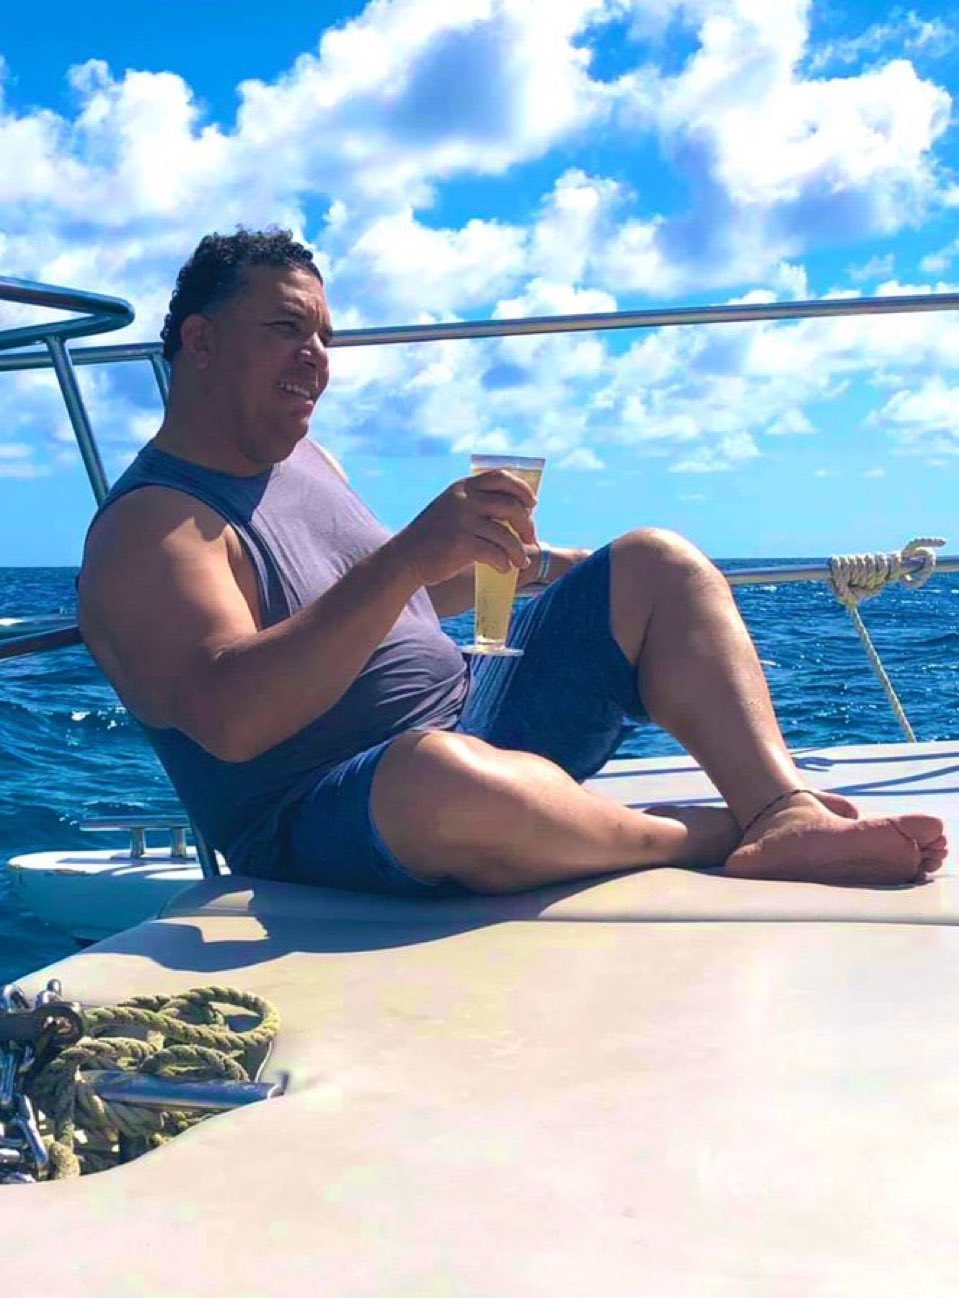 Happy 50th birthday to the sexiest baseball player of all-time, Bartolo Colon. 